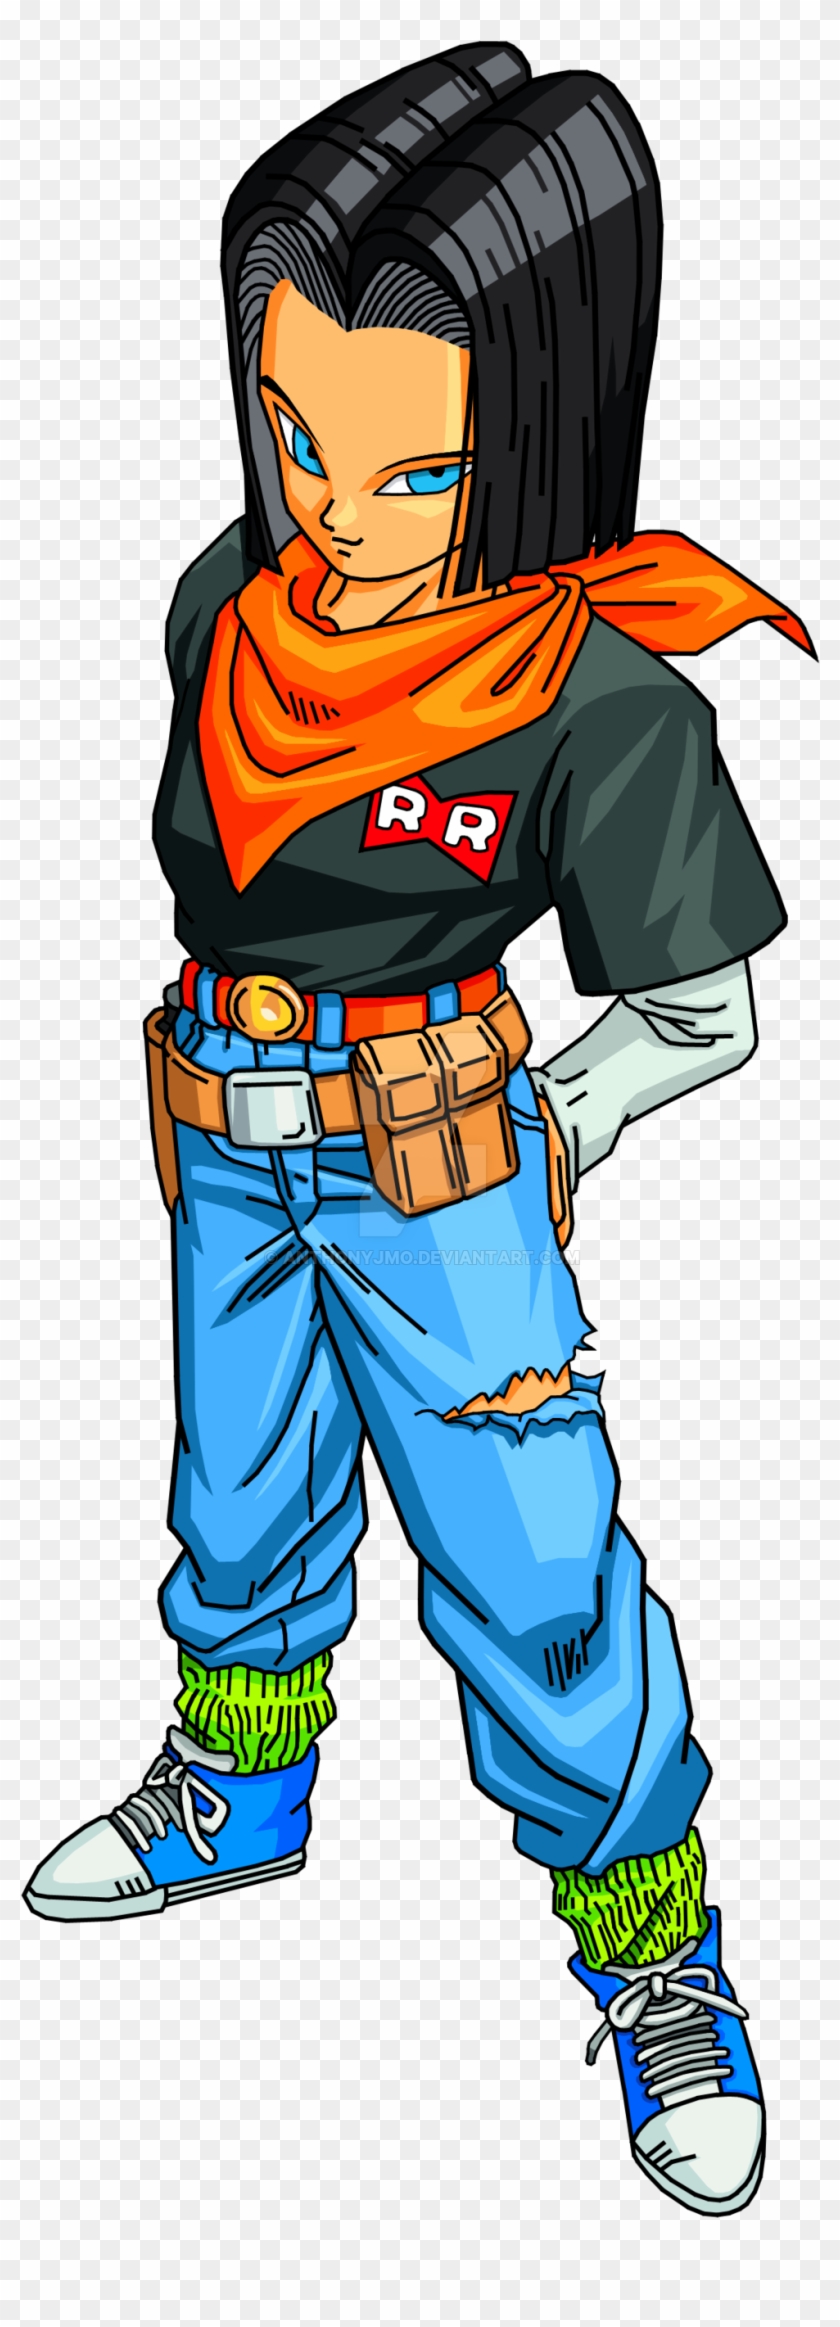 Android 17 By Anthonyjmo - Android 17 Png #1273742